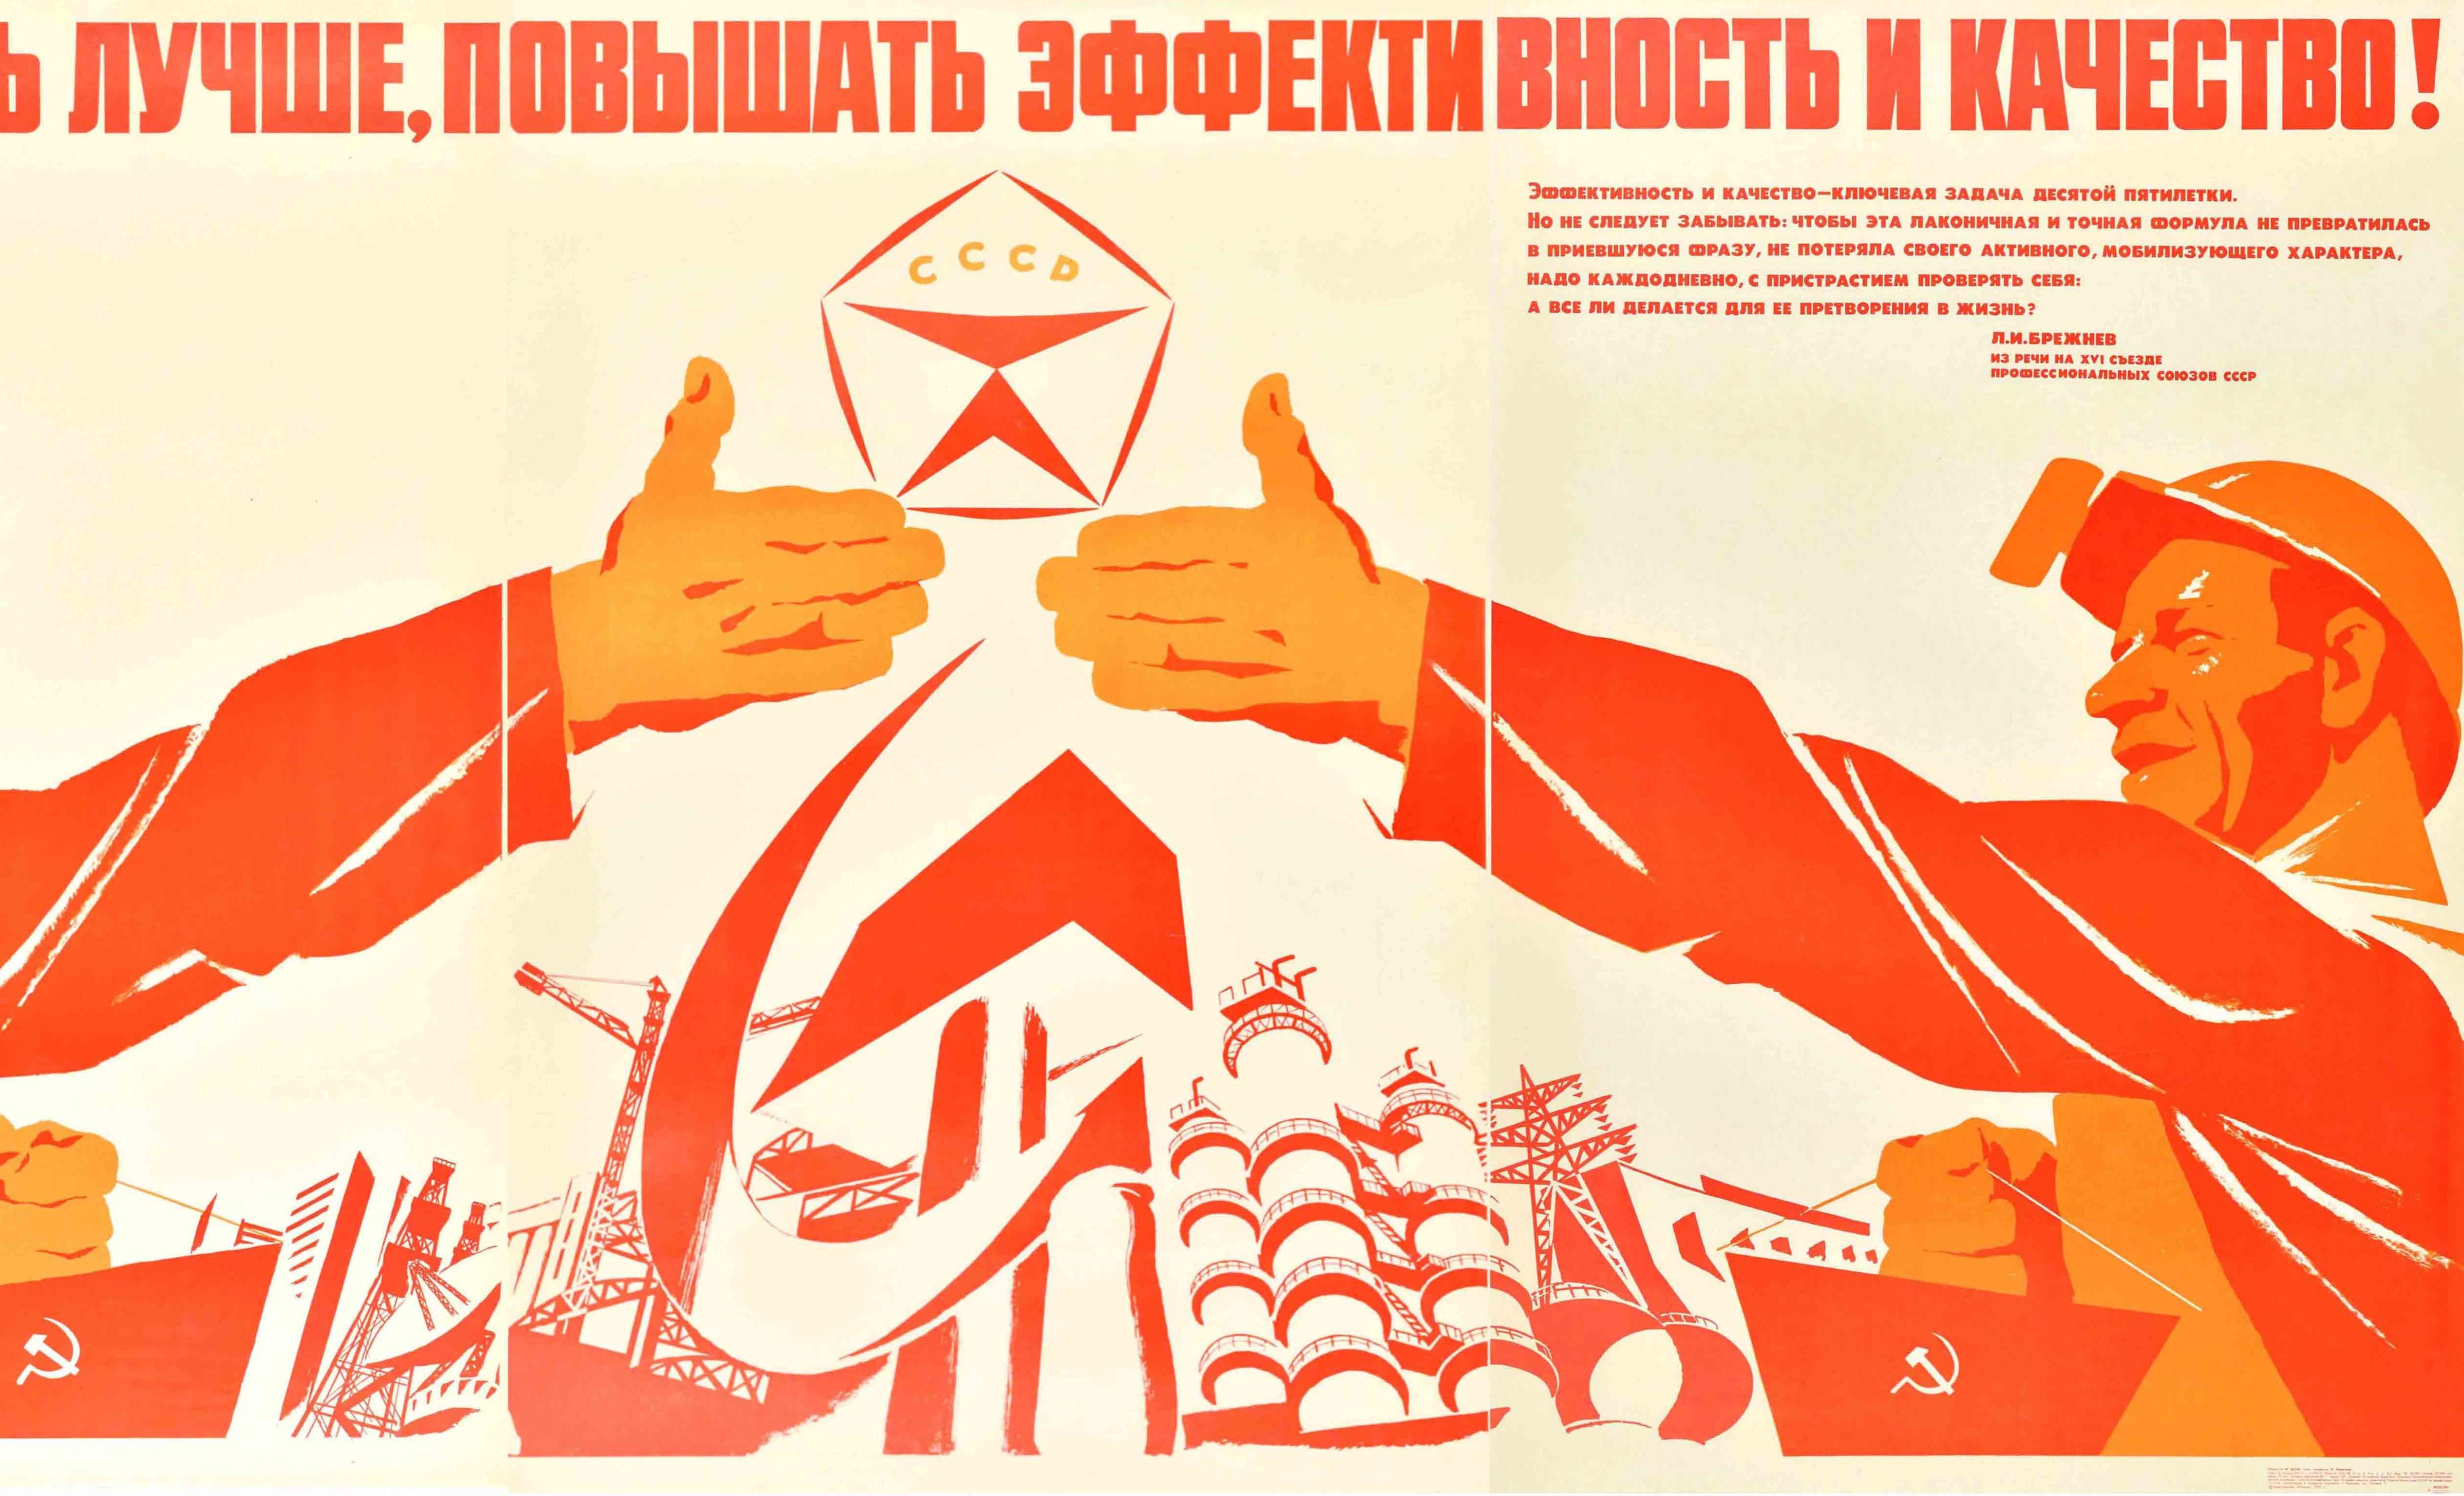 Original vintage Soviet propaganda poster featuring a dynamic design showing two workers holding red flags and reaching to each other with a seal of quality CCCP logo in the centre above a hammer and sickle emblem and industrial factory buildings,